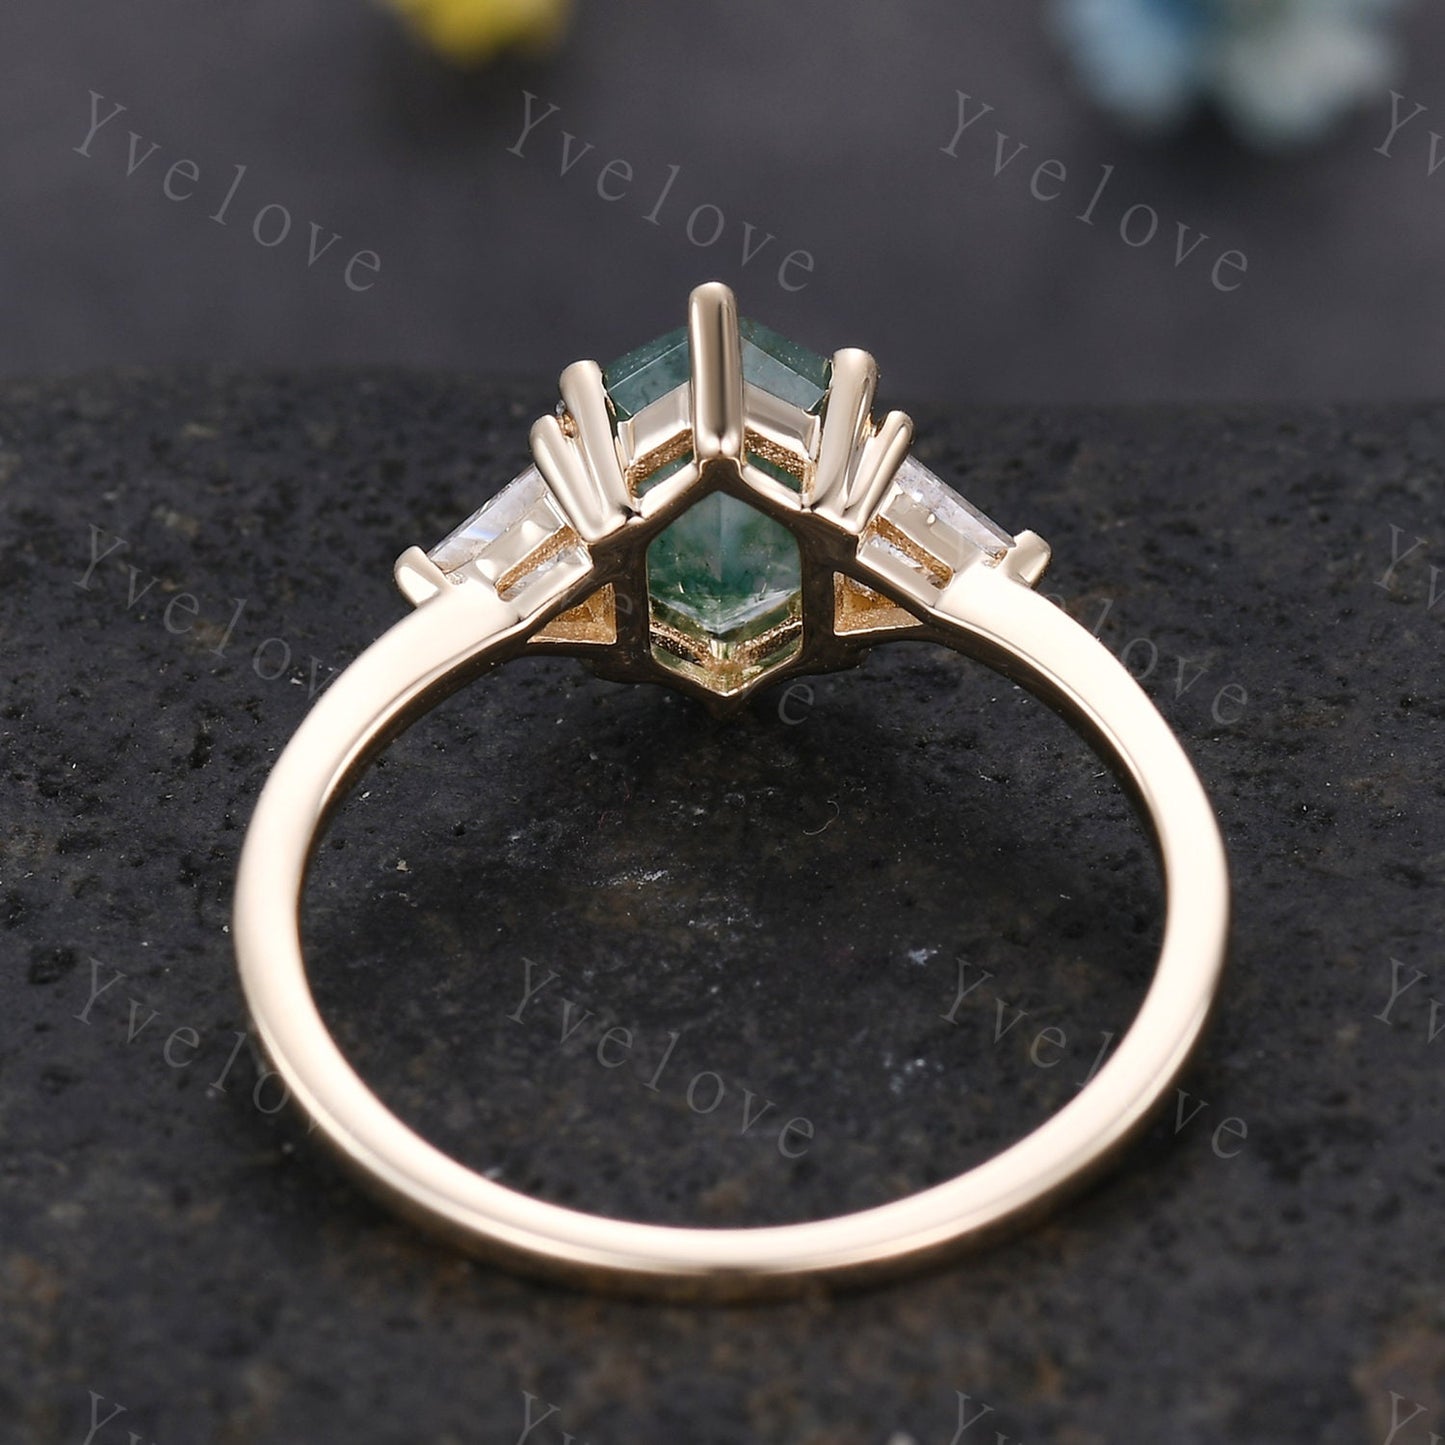 Retro hexagon cut Moss Agate Ring,Vintage Gold Ring,Triangle Moissanite Jewelry,Unique Engagement Ring,Promise Ring,Bridal Ring Gift For Her